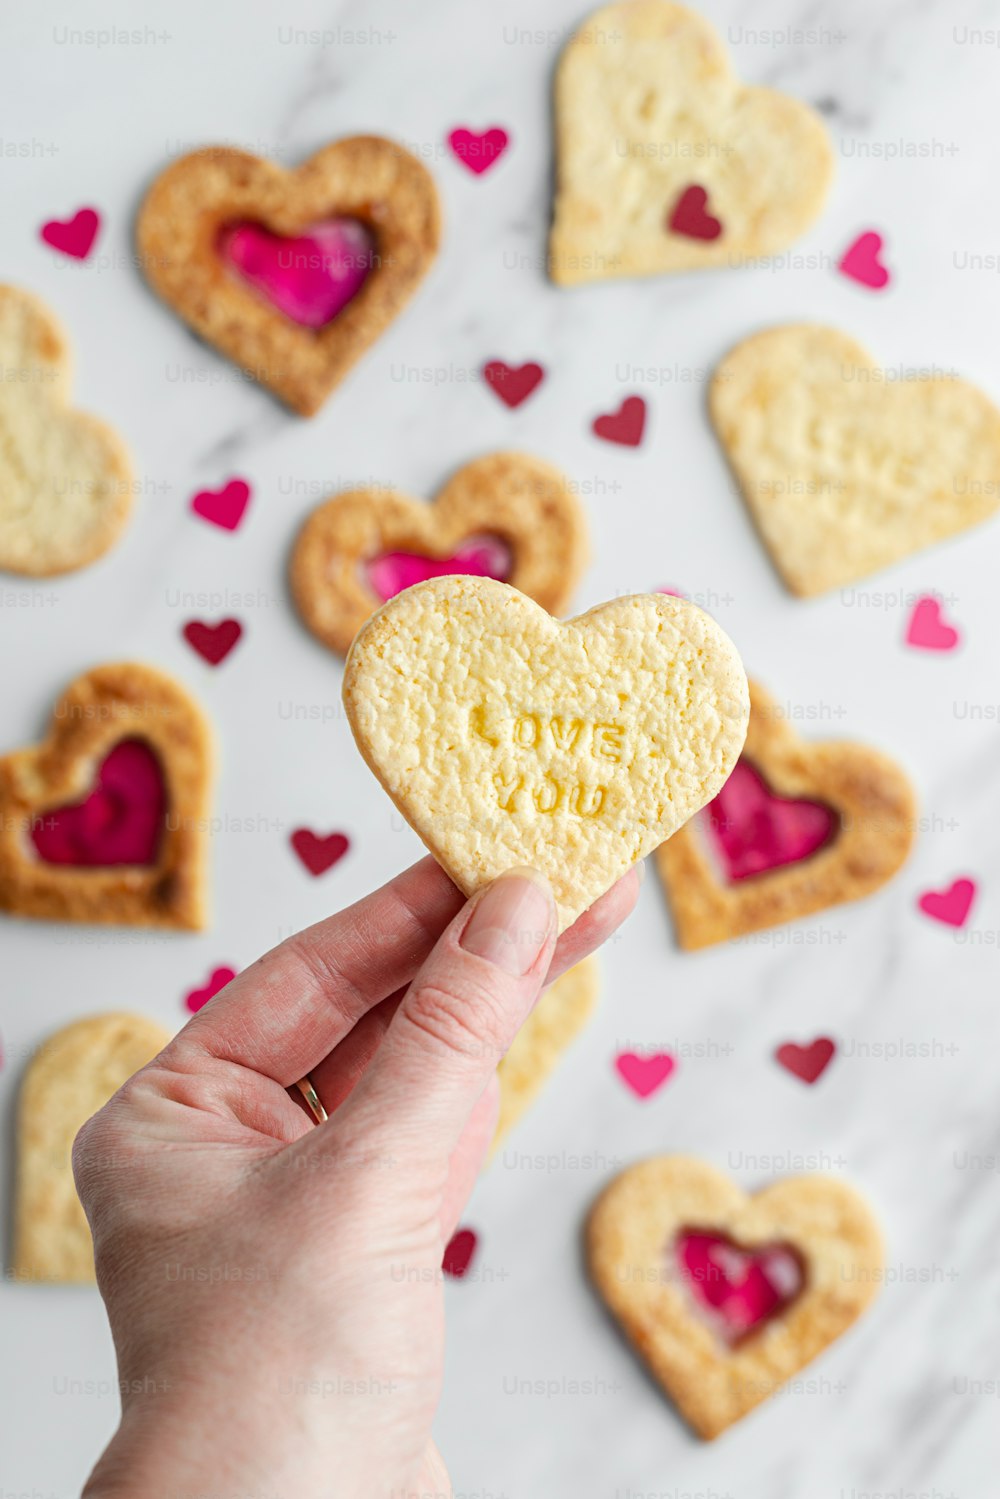 a person holding a heart shaped biscuit in their hand